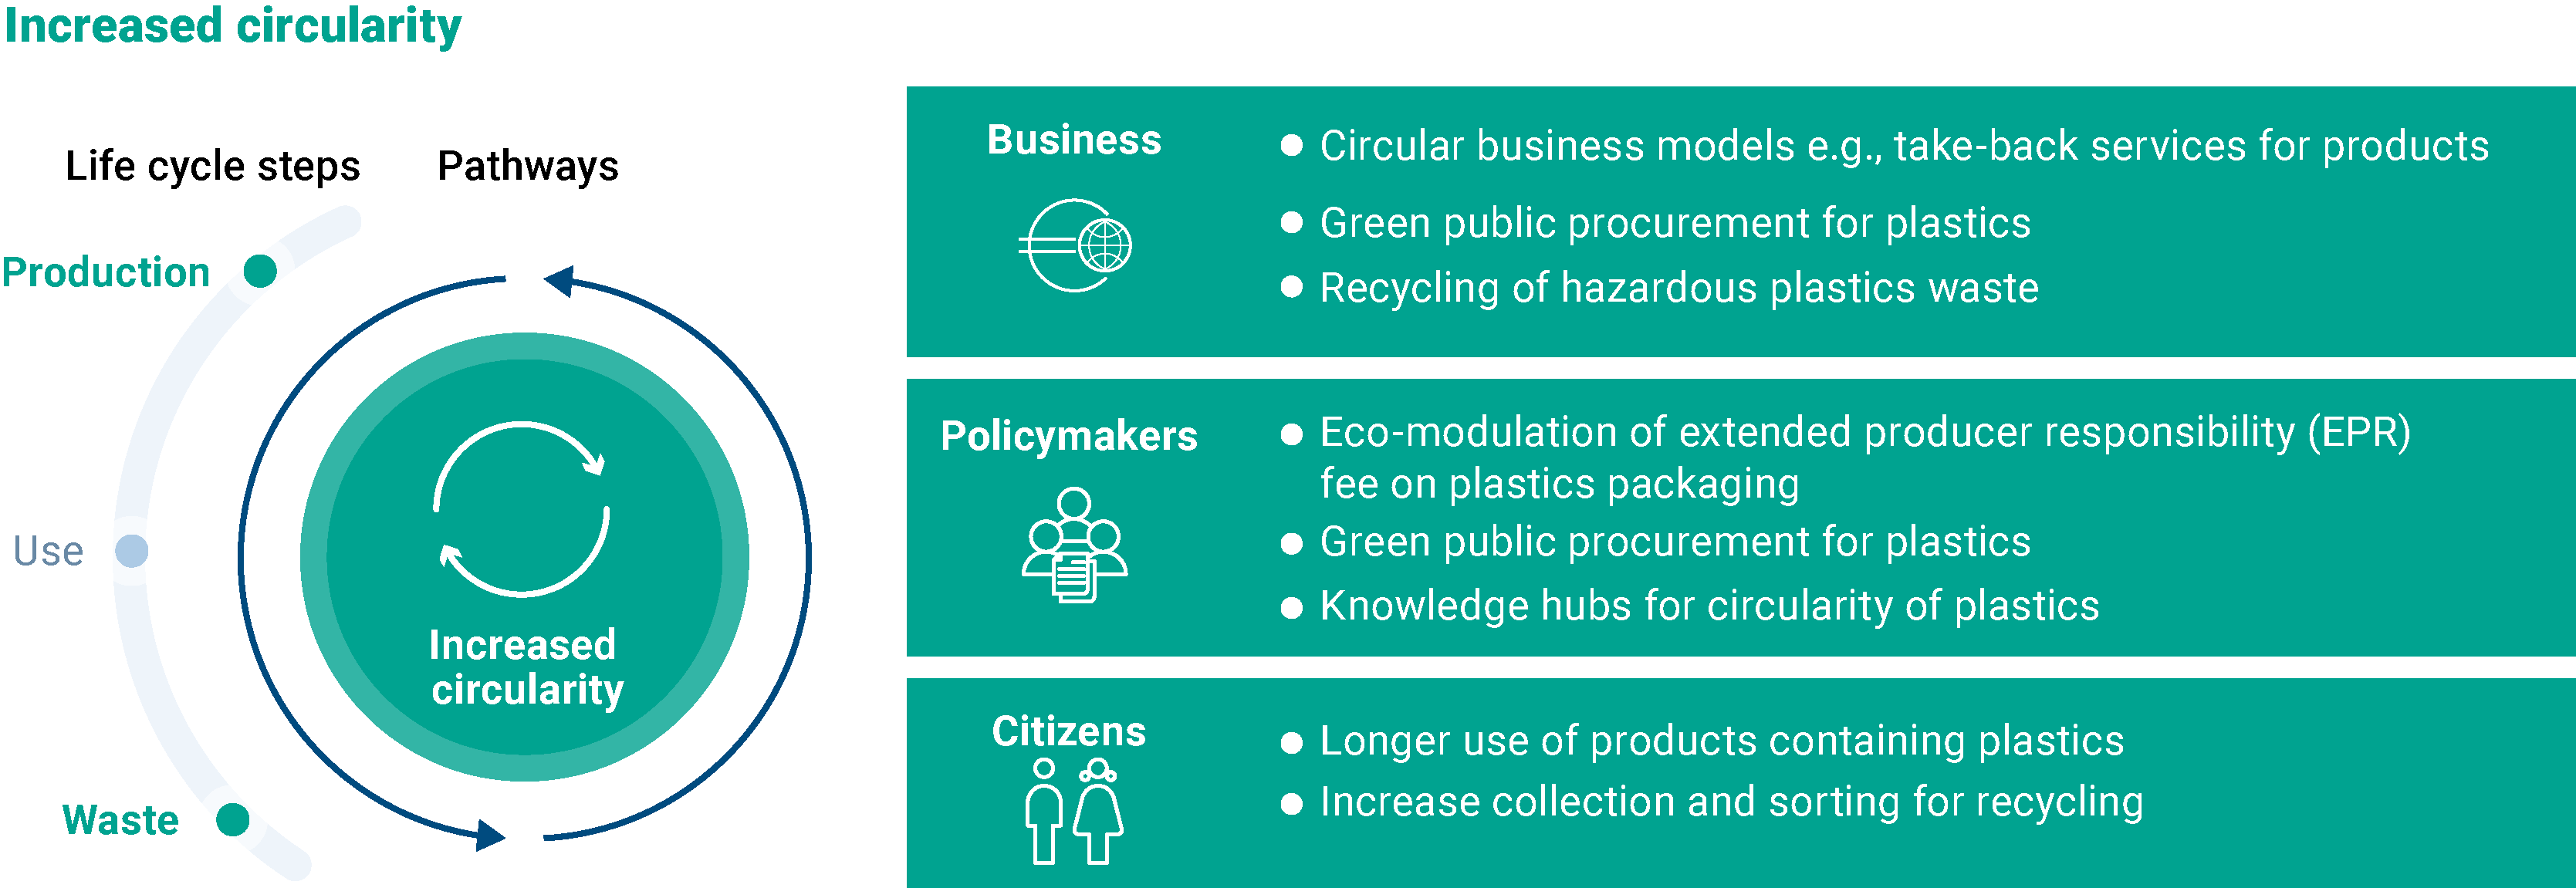 Note: The life cycle steps highlighted in green are the ones most relevant for the increased circularity of plastics pathway, but are not necessarily the only ones that can be found.  Source: Developed by the EEA and the European Topic Centre on Circular Economy and Resource Use (ETC/CE) — illustration by the Collaborating Centre on Sustainable Consumption and Production (CSCP) and the EEA.